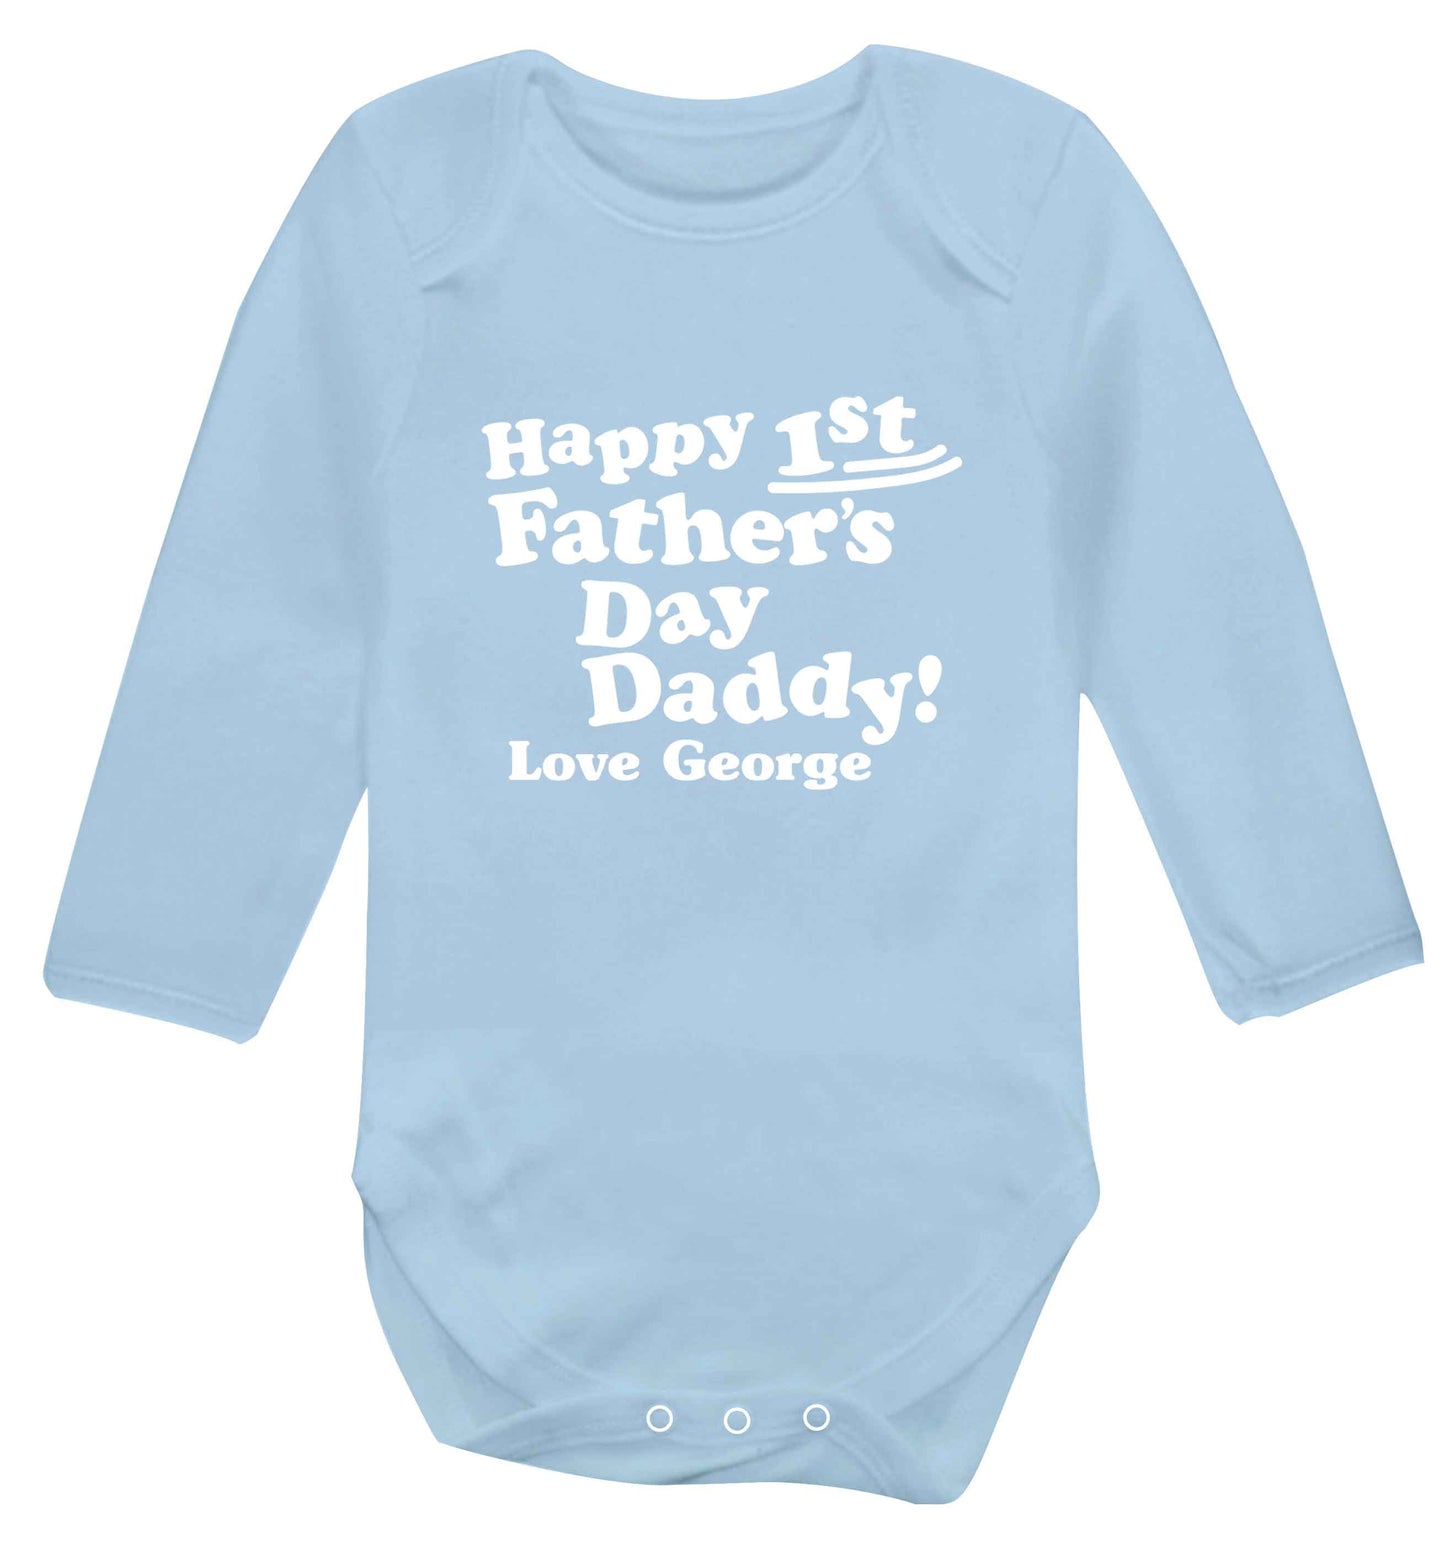 Happy first Fathers Day daddy love personalised baby vest long sleeved pale blue 6-12 months